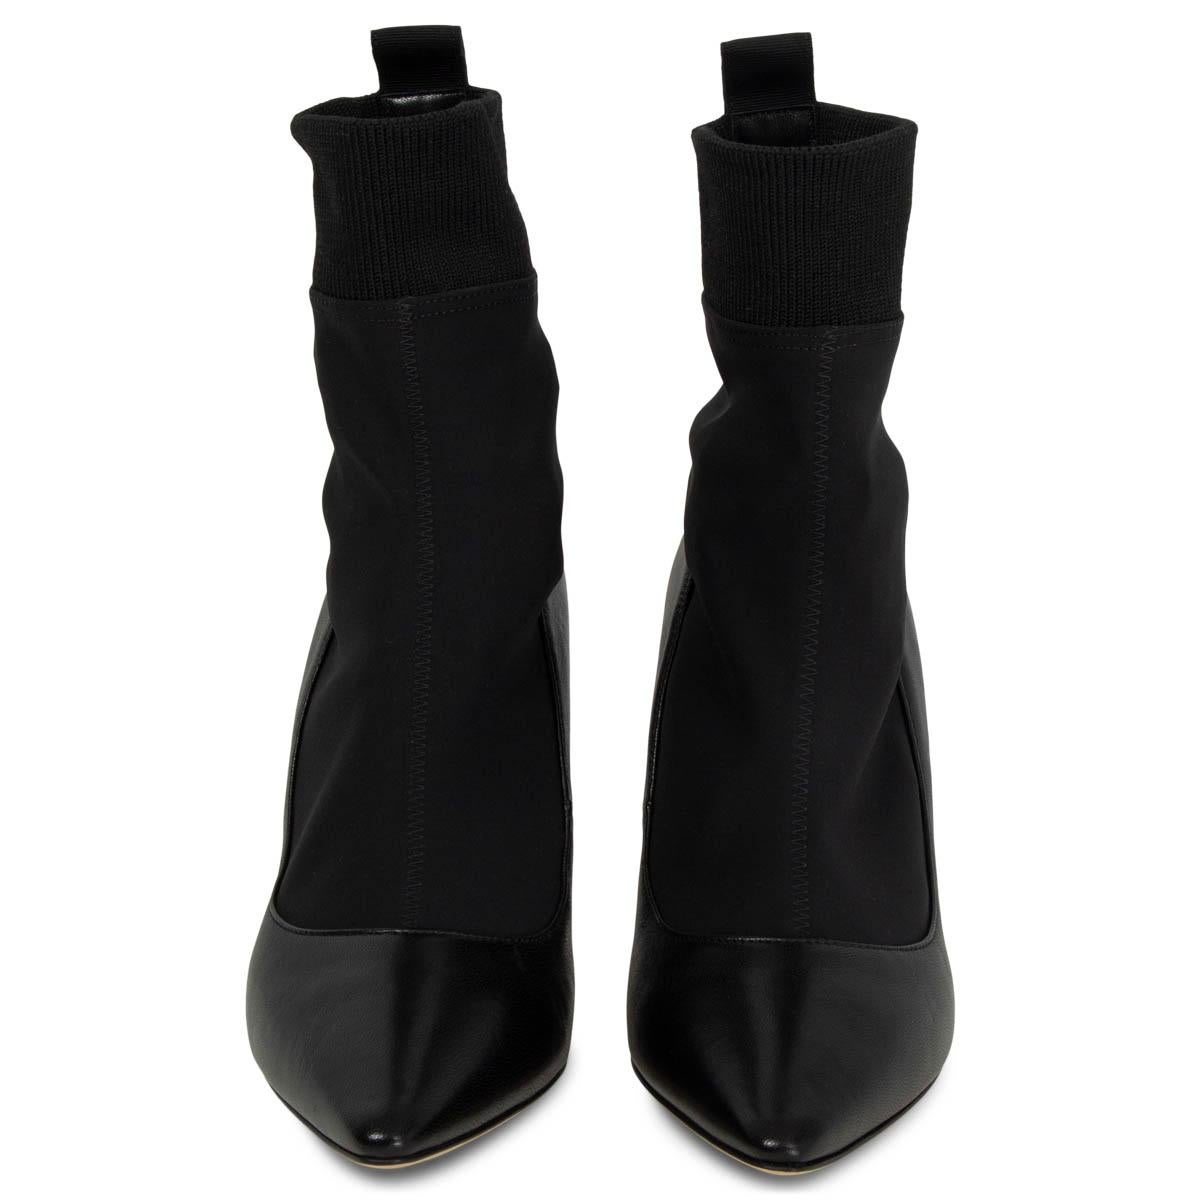 100% authentic Jimmy Choo Brandon 85 Ankle Sock Boots in black nappa leather and neoprene stretch fabric. They come with a pointed-toe and stretch rib fabric around the ankle. 'I want Choo' is printed on a grosgrain band above the heel. Brand new.